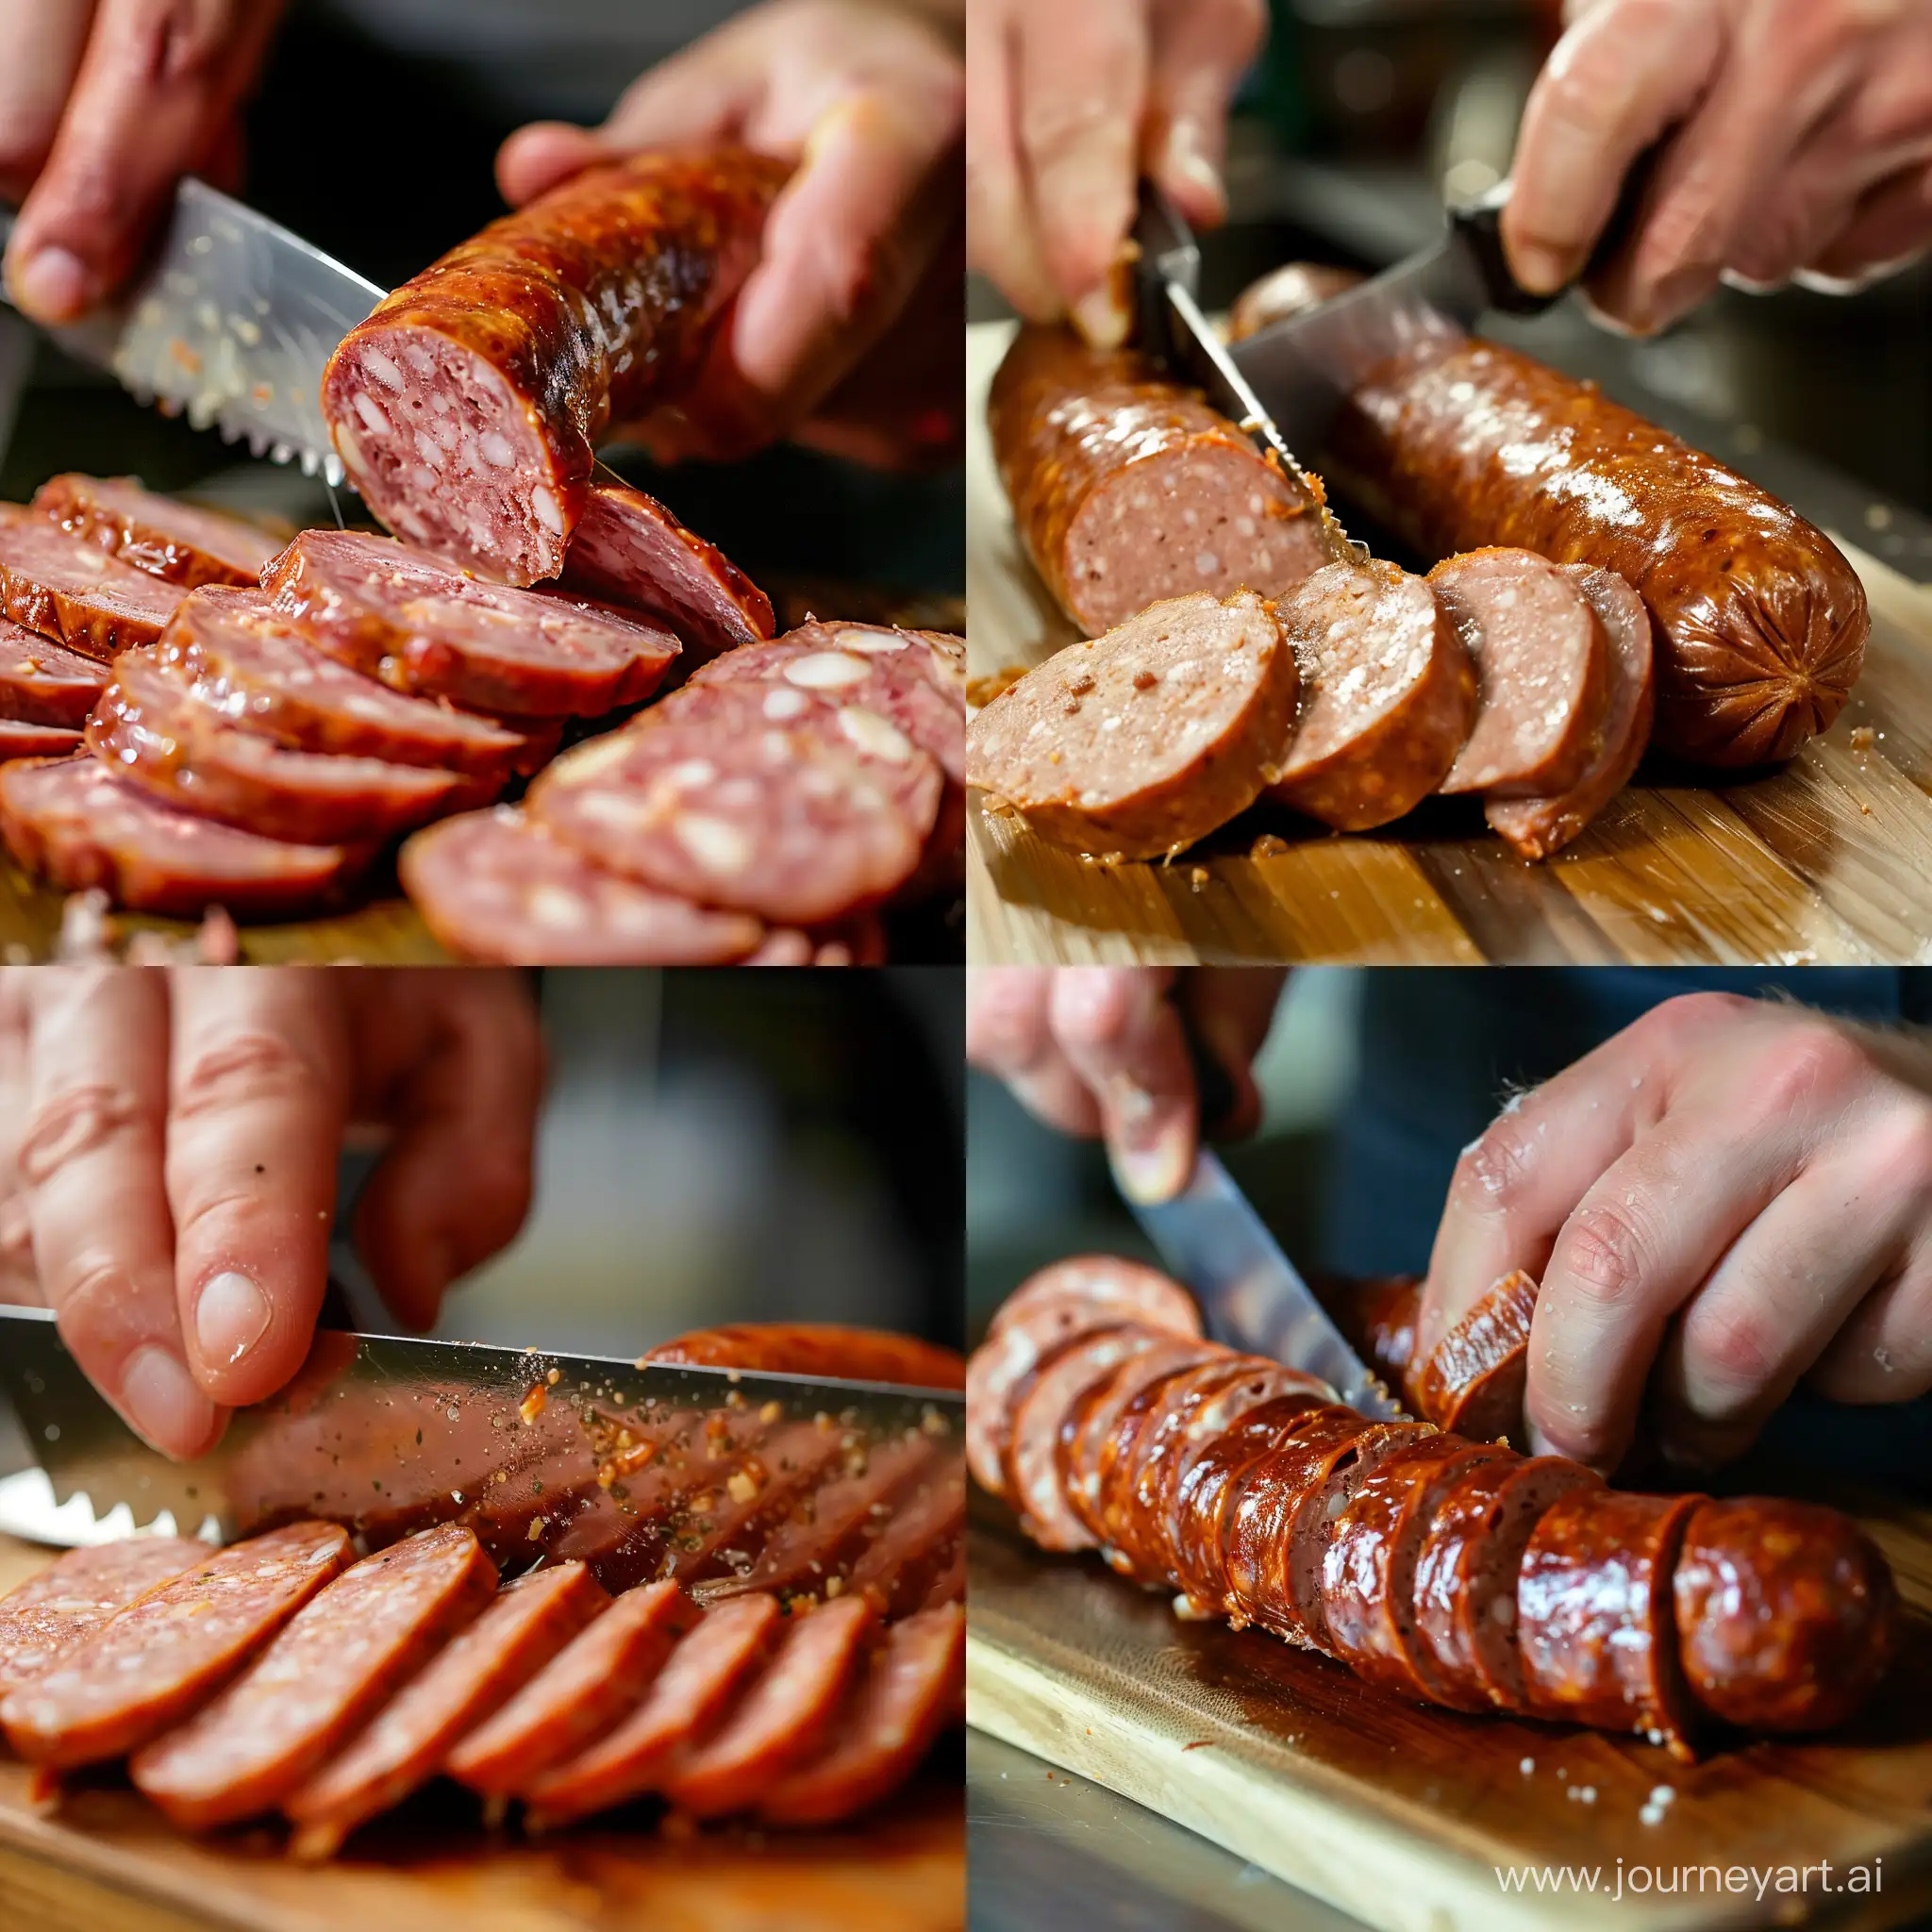 Slicing-Sausages-in-a-Vibrant-Kitchen-Setting